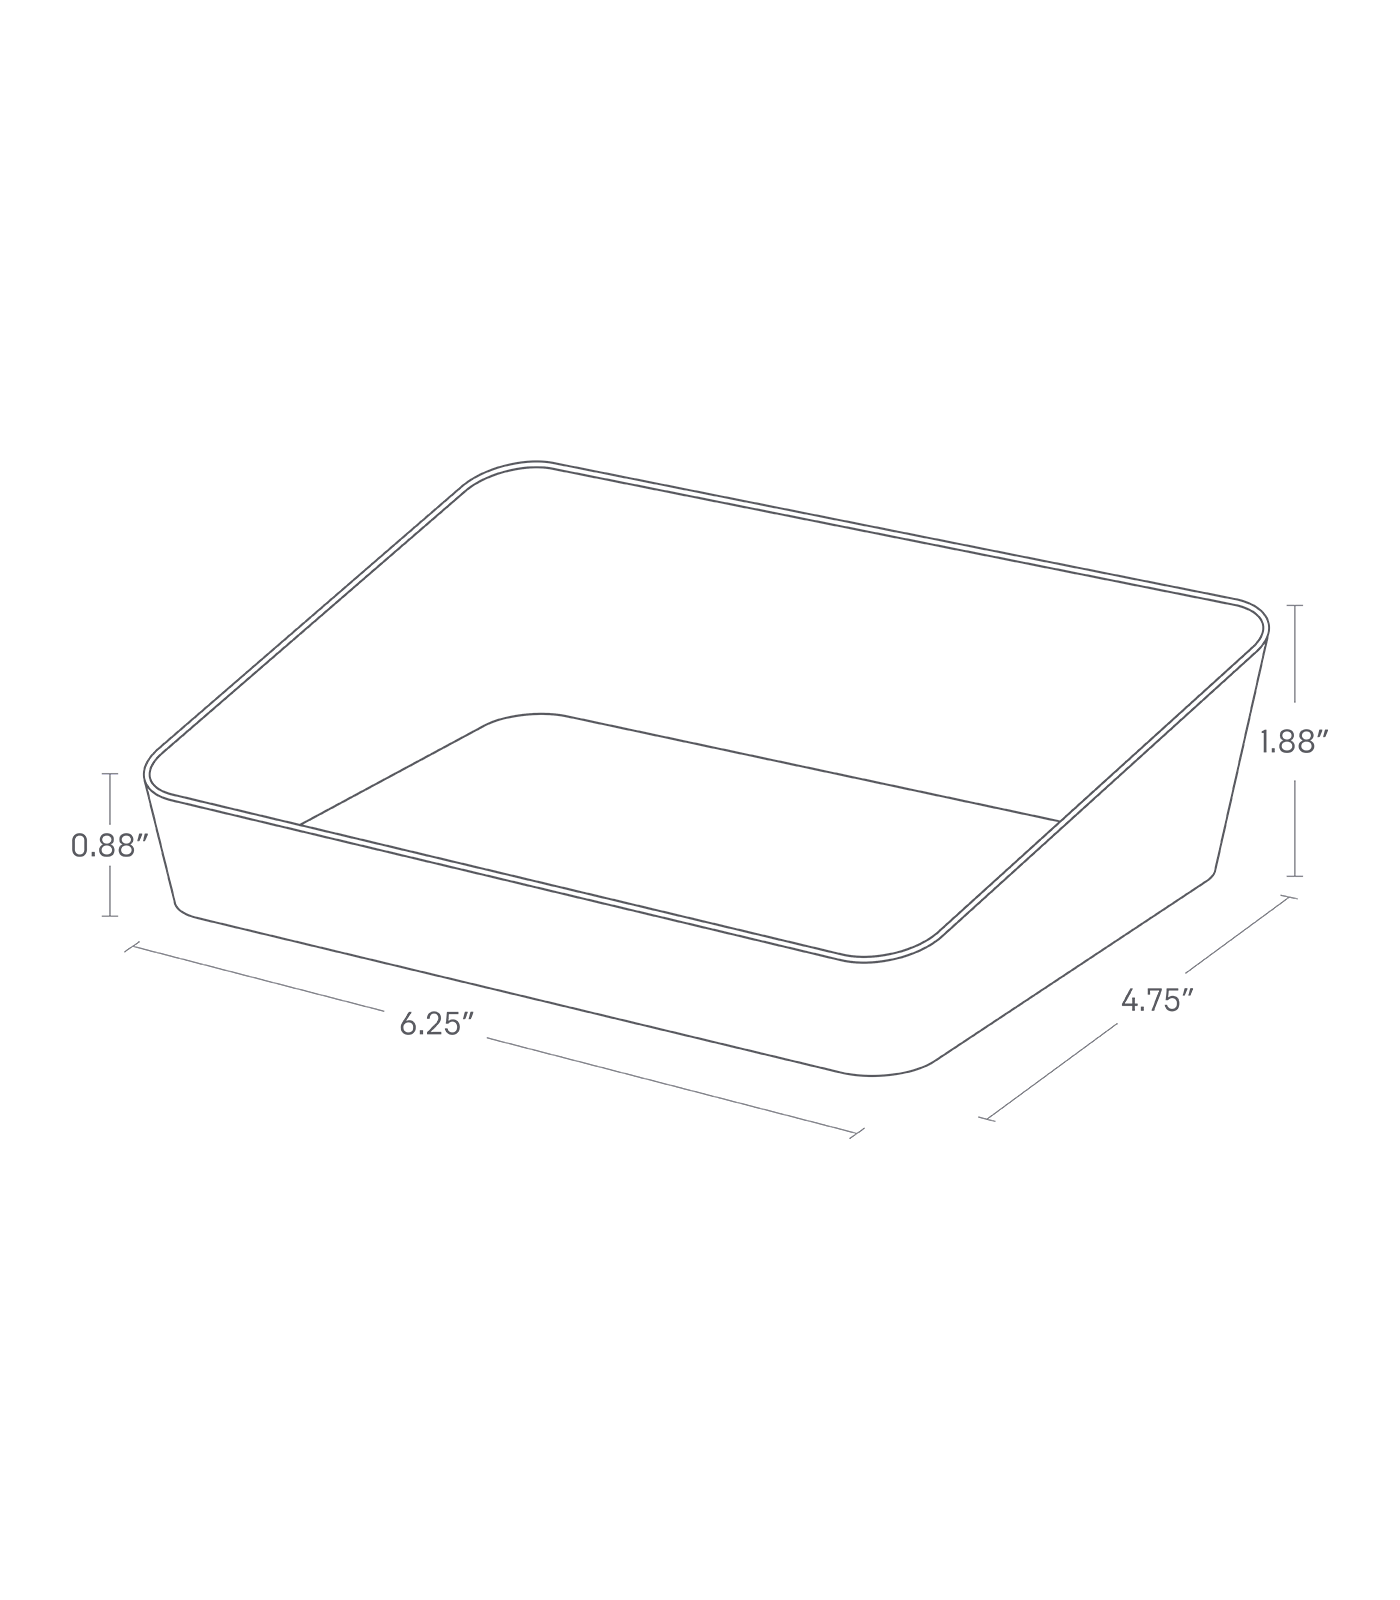 Dimension image for Vanity Tray - Angled - Two Sizeson a white background showinglength of 6.25